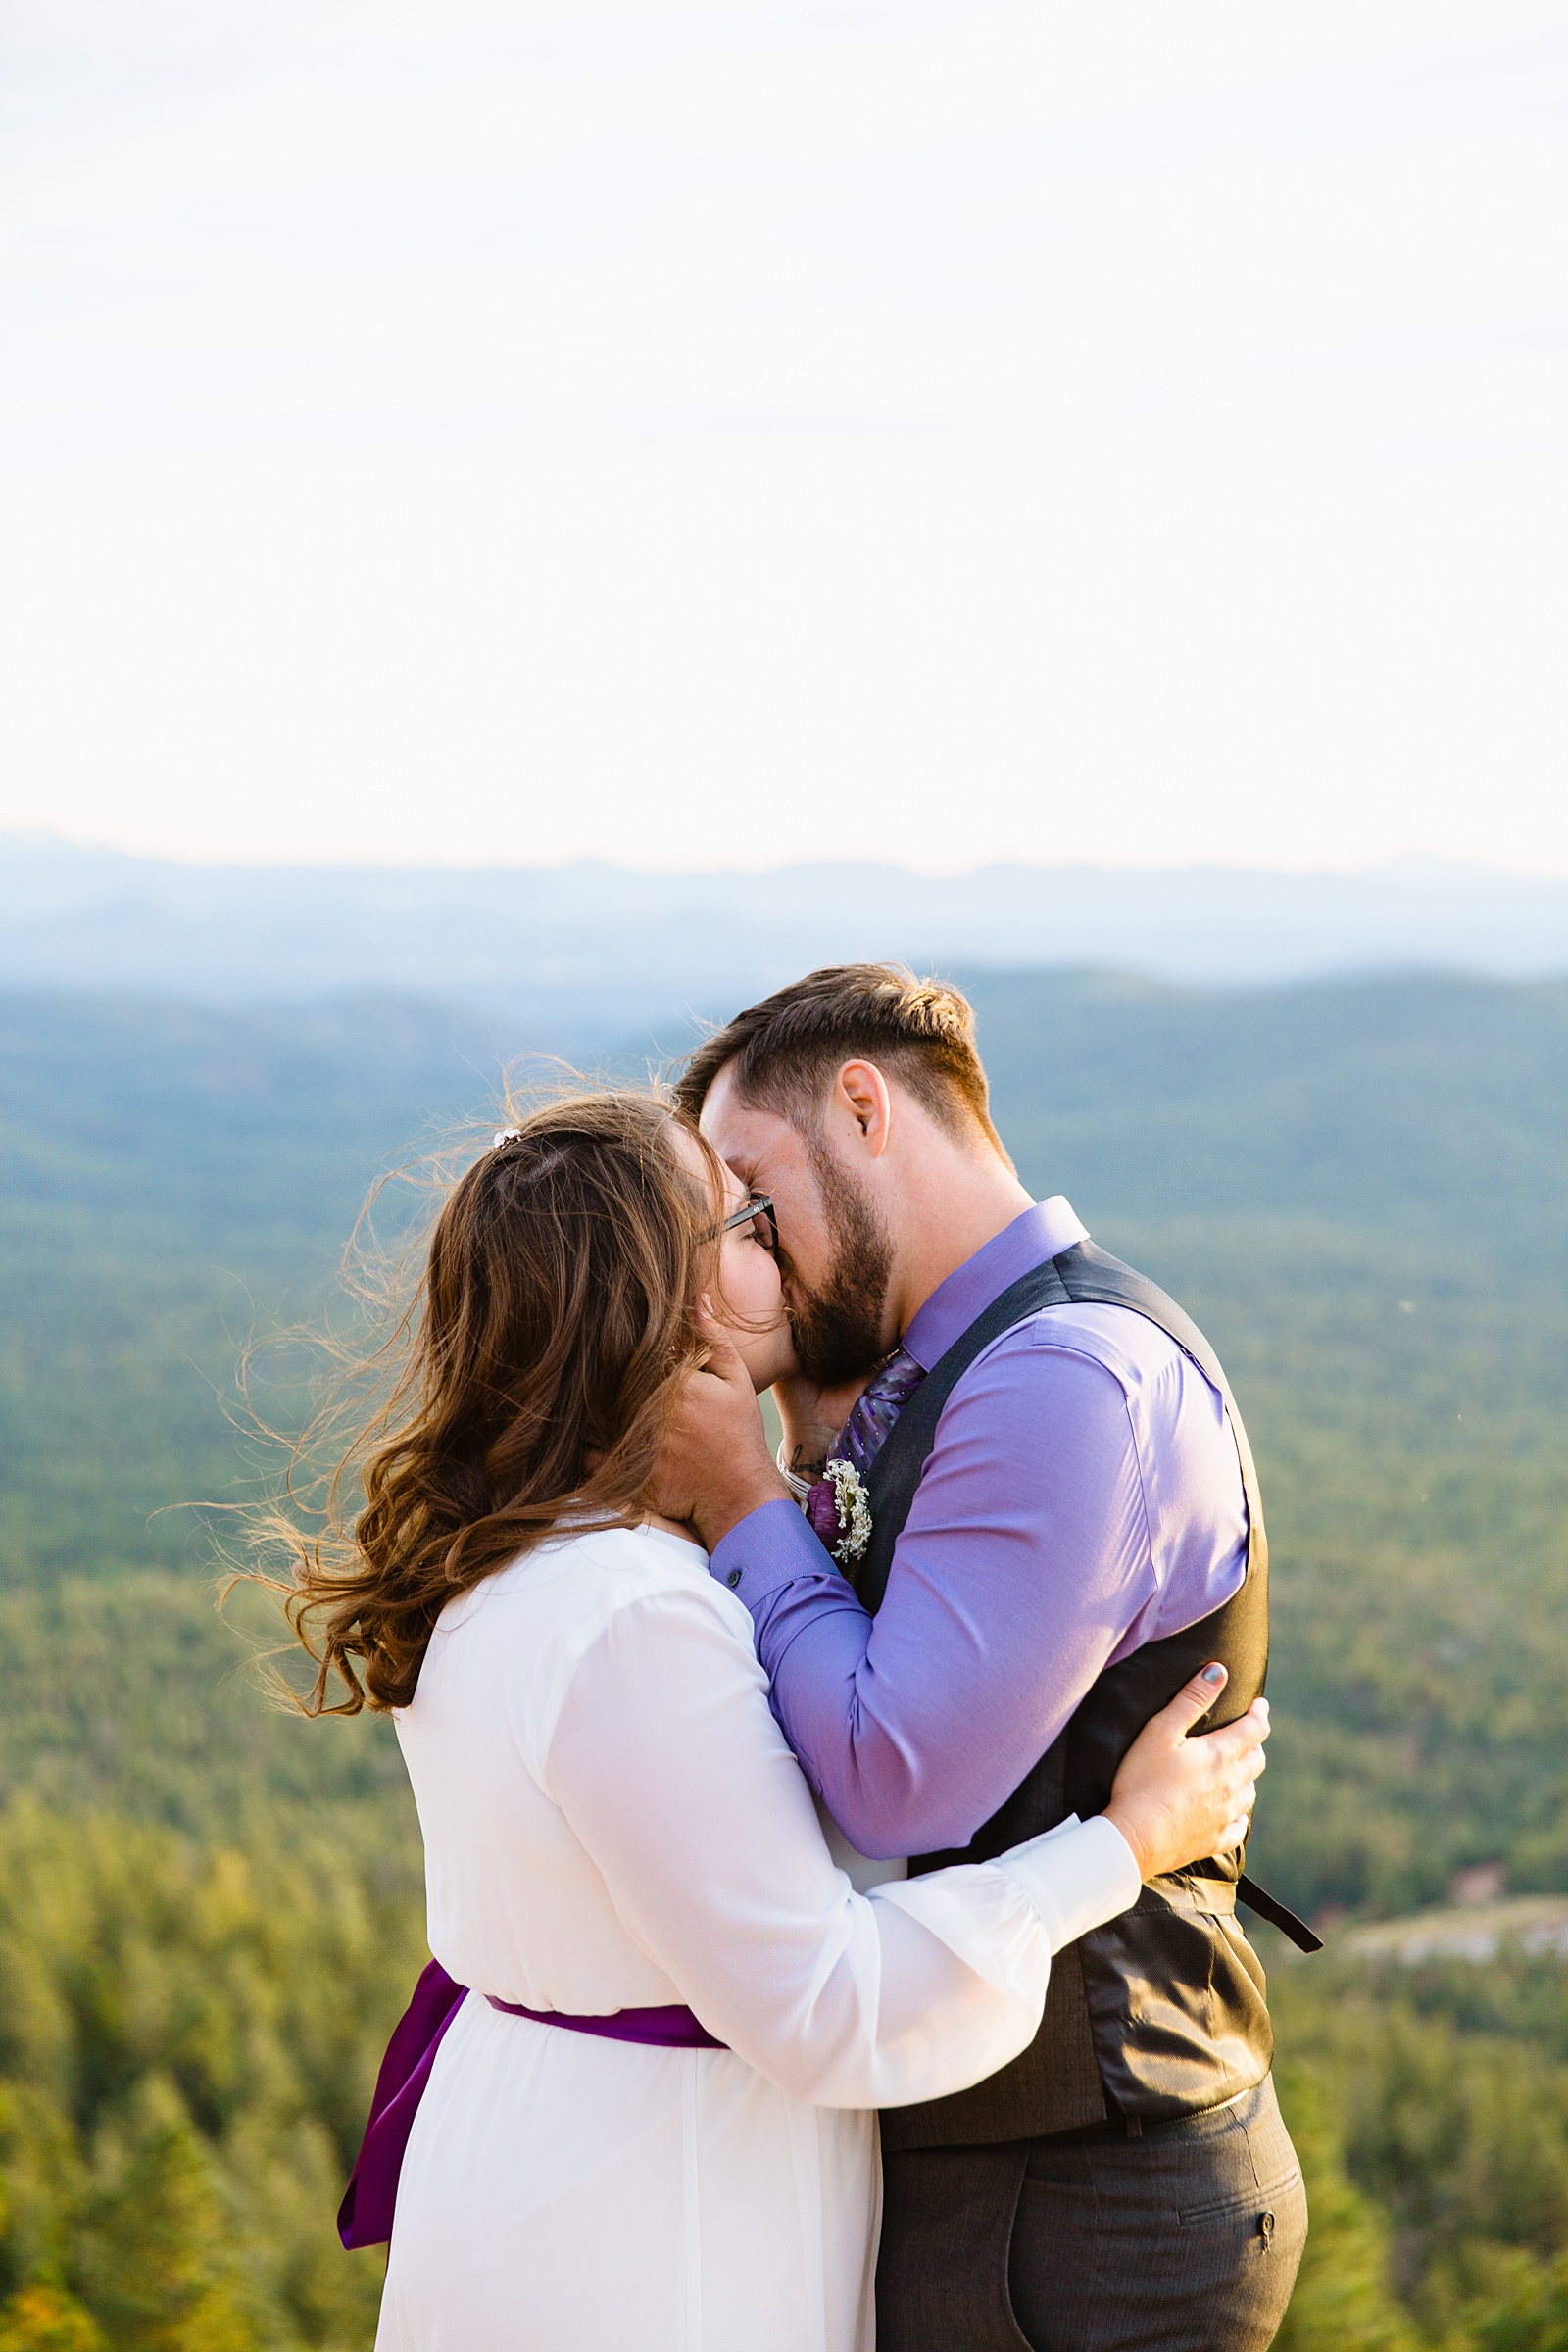 Bride and Groom share their first kiss during their wedding ceremony at Mogollon Rim by Arizona elopement photographer PMA Photography.